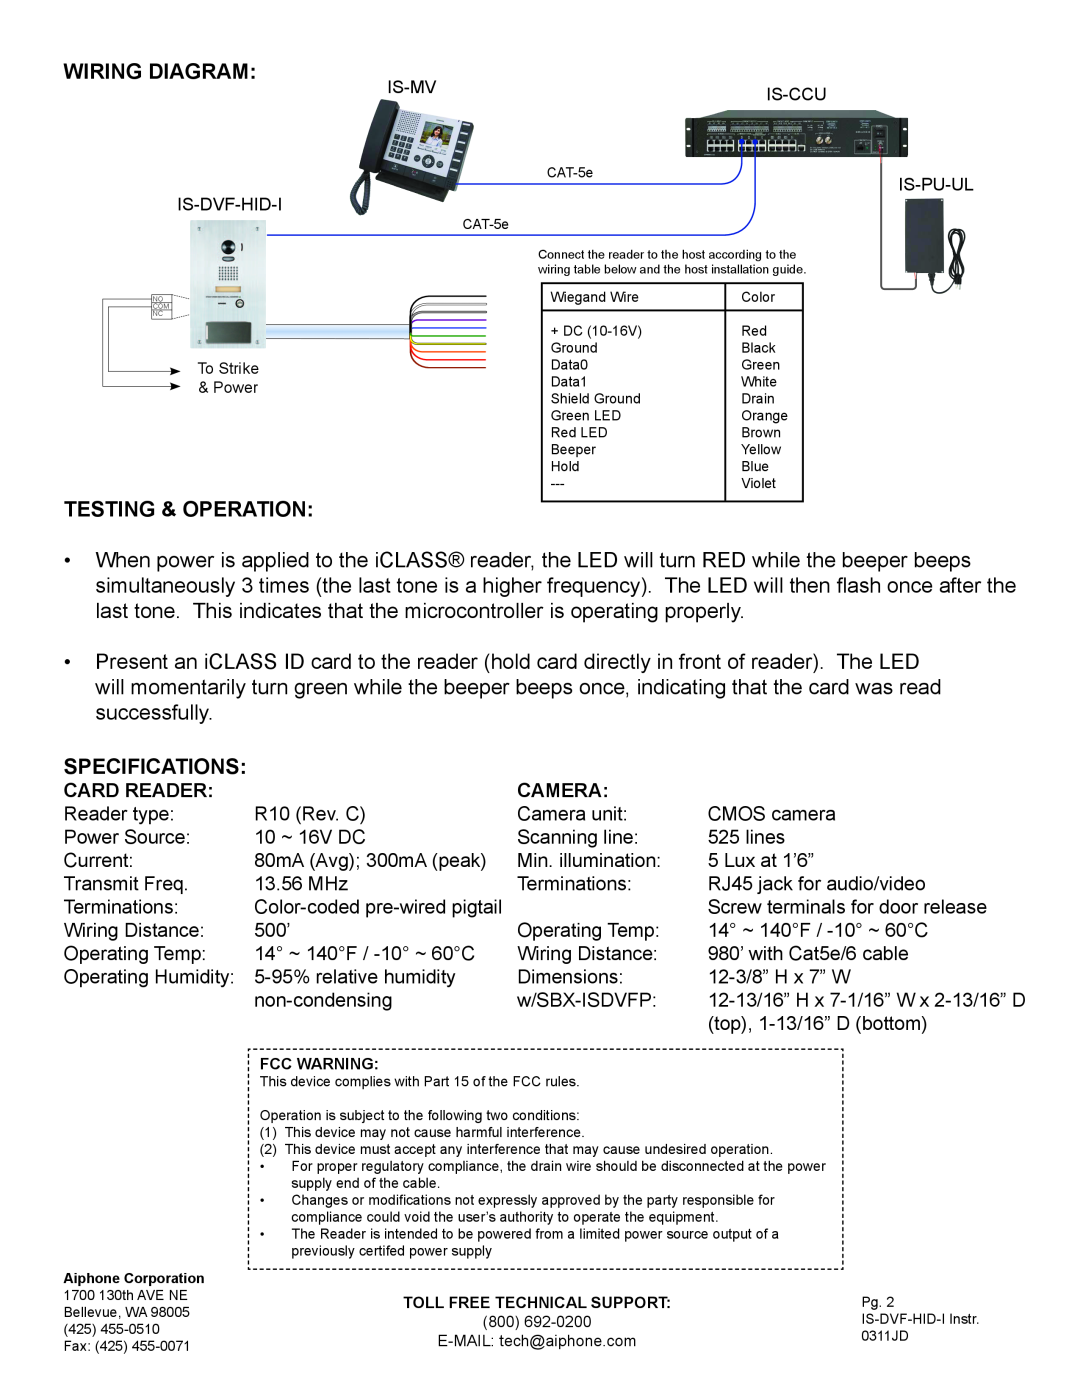 Aiphone IS-DVF-HID-I dimensions Wiring Diagram, Testing & Operation, Specifications, Card Reader, Camera 